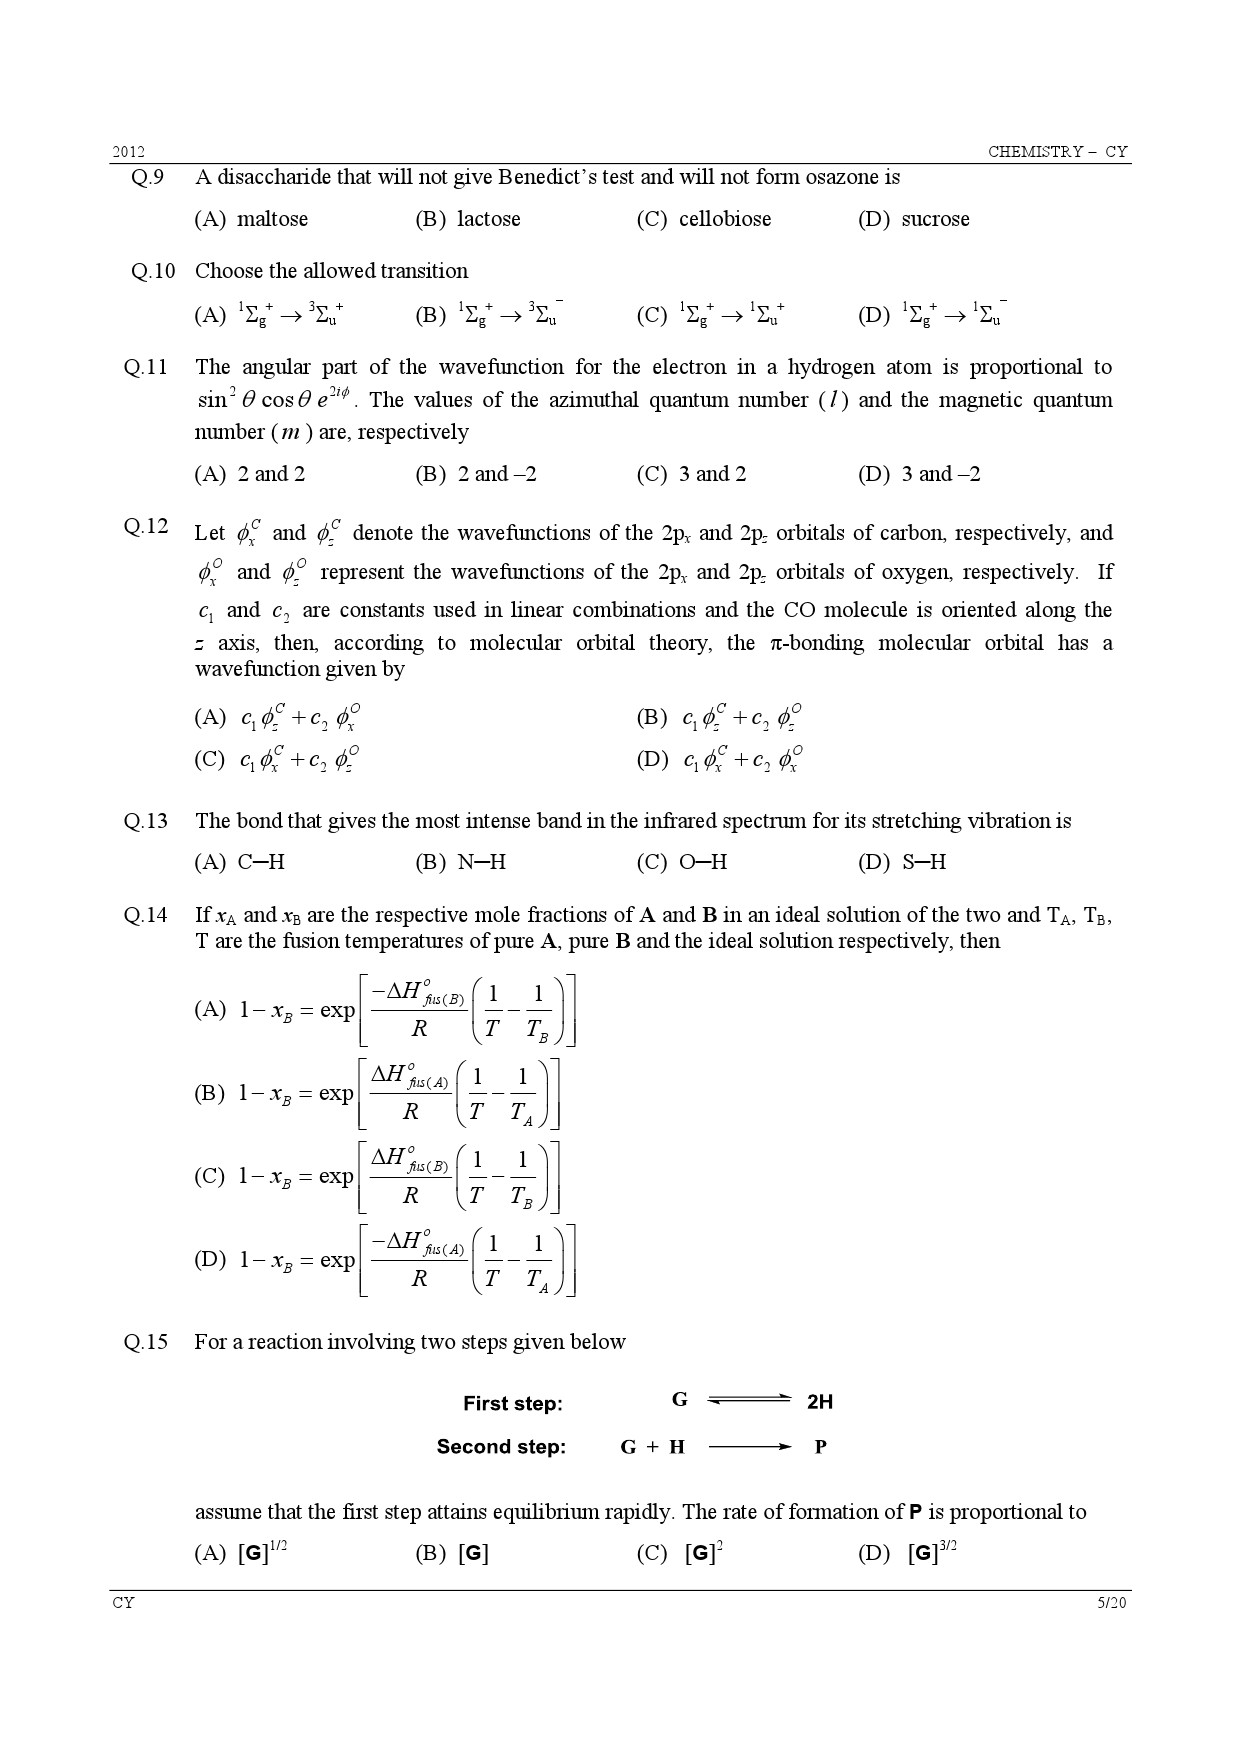 GATE Exam Question Paper 2012 Chemistry 5